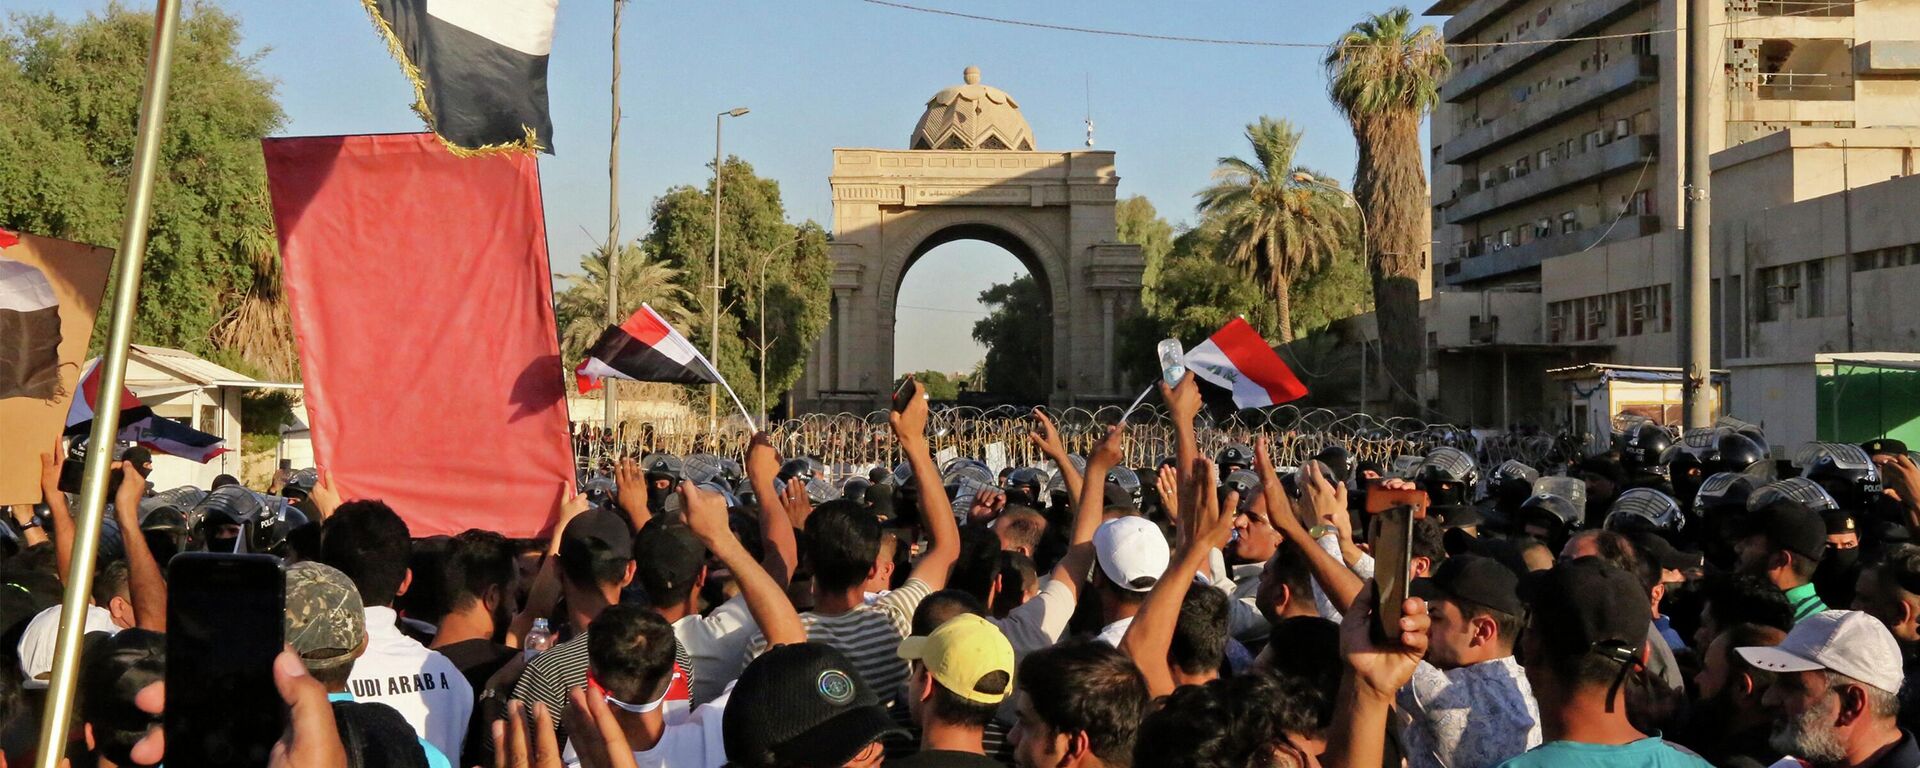 Supporters of Iraqi Shiite cleric Muqtada al-Sadr gather outside the main gate of Baghdad's Green Zone on July 27, 2022 to protest against the nomination of Mohammed Shia al-Sudani for the prime minister position. - Sputnik International, 1920, 27.07.2022